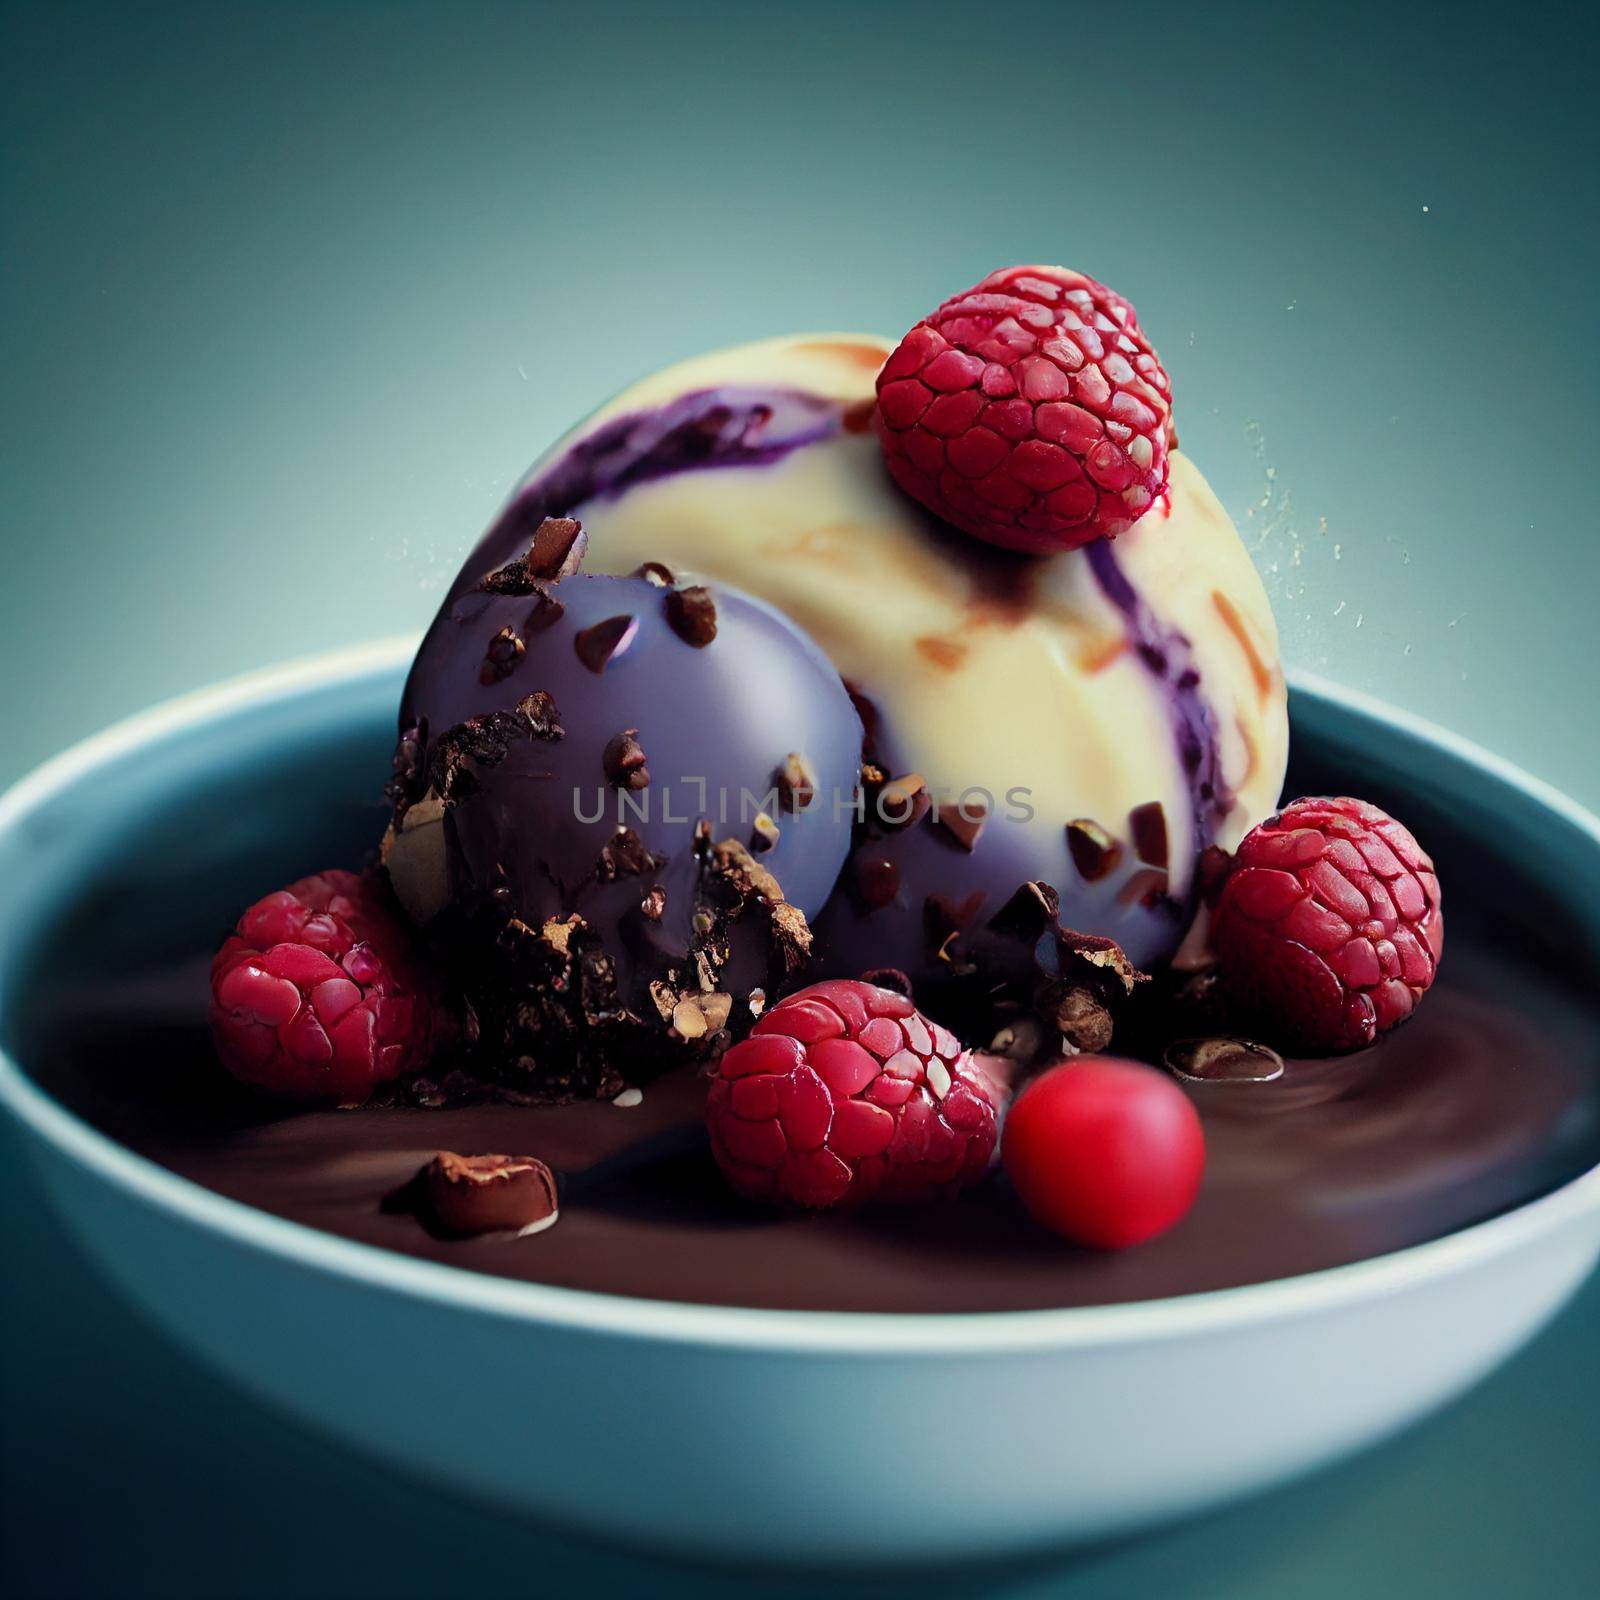 Photorealistic 3d illustration icecream scoop, berries and melted chocolate. by vmalafeevskiy